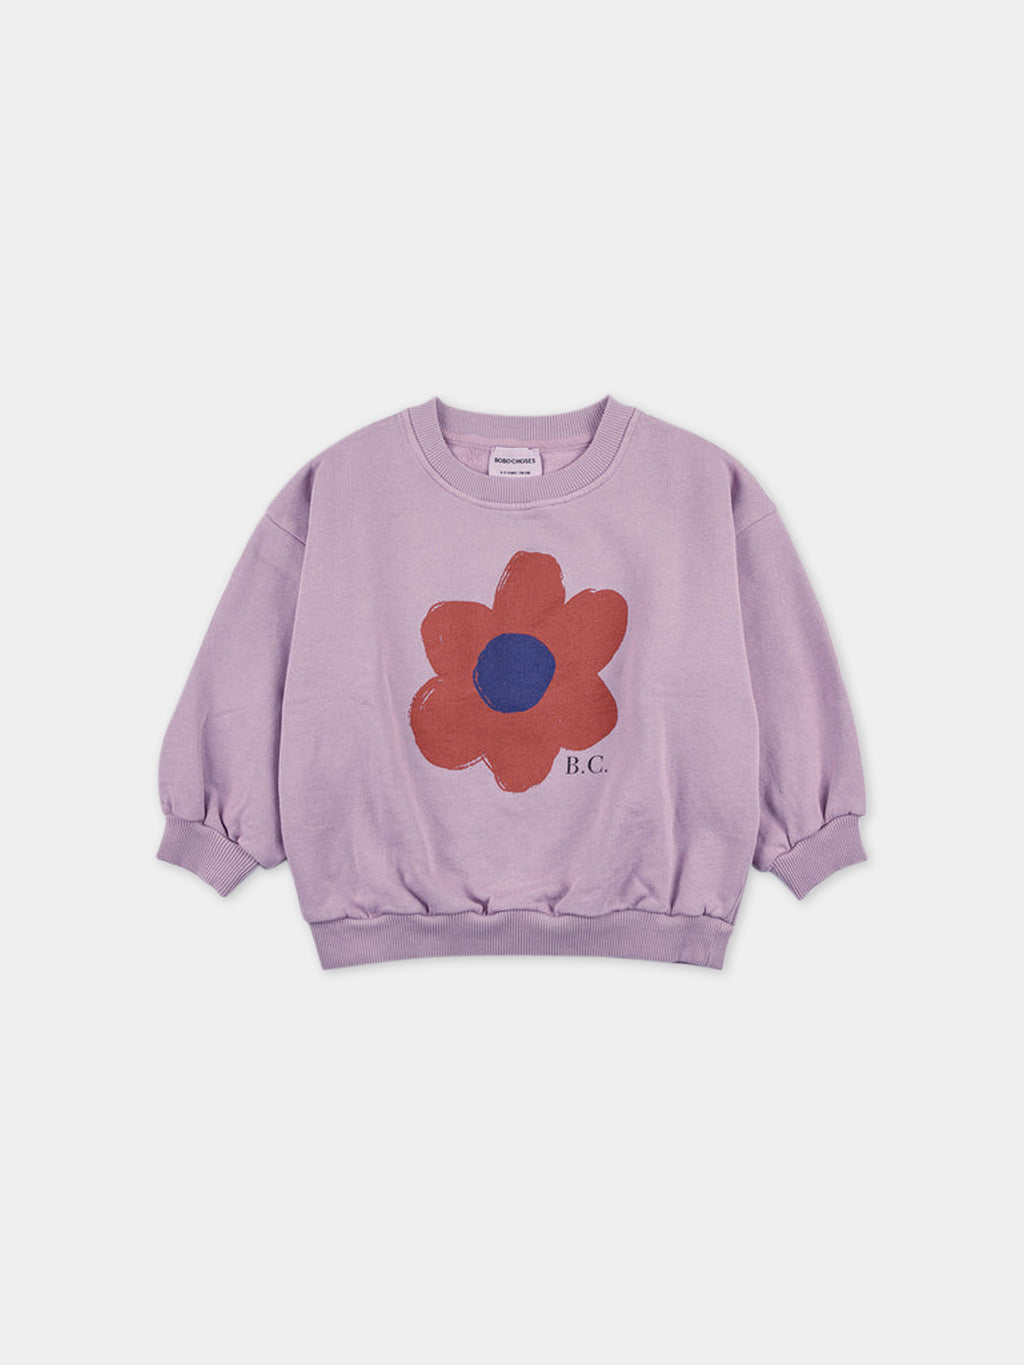 Purple sweatshirt for girl with flower and logo